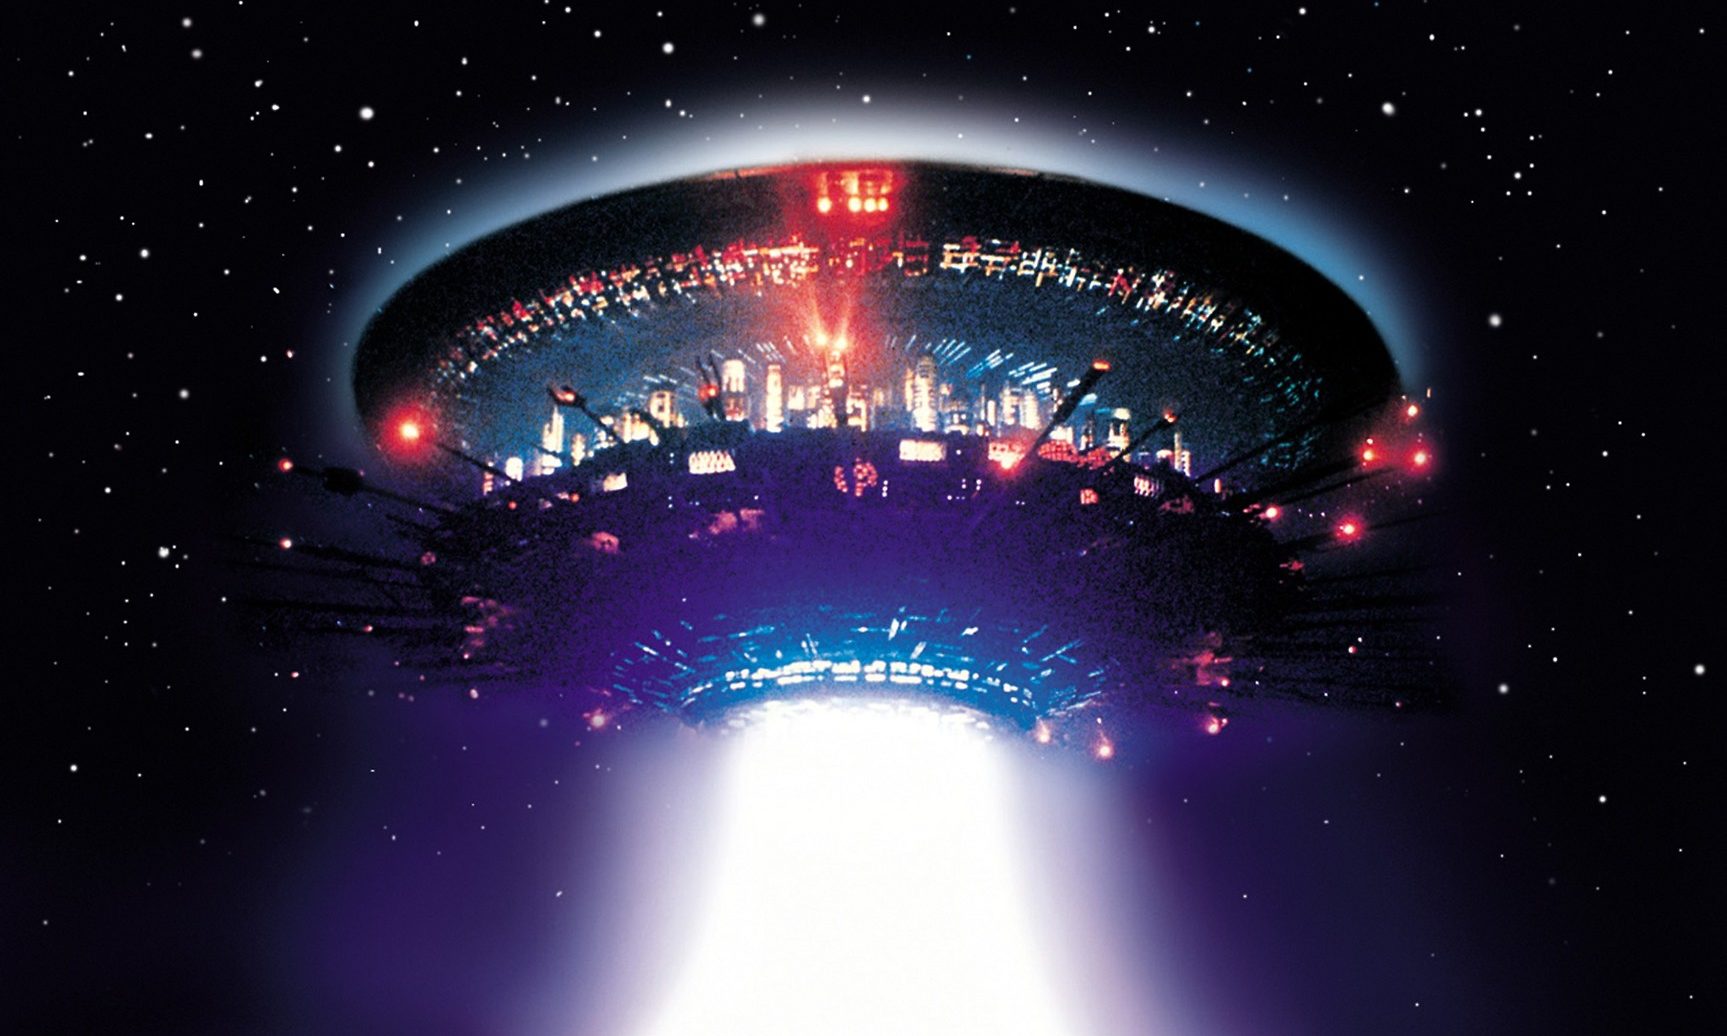 An image from the 1977 film Close Encounters of the Third Kind.